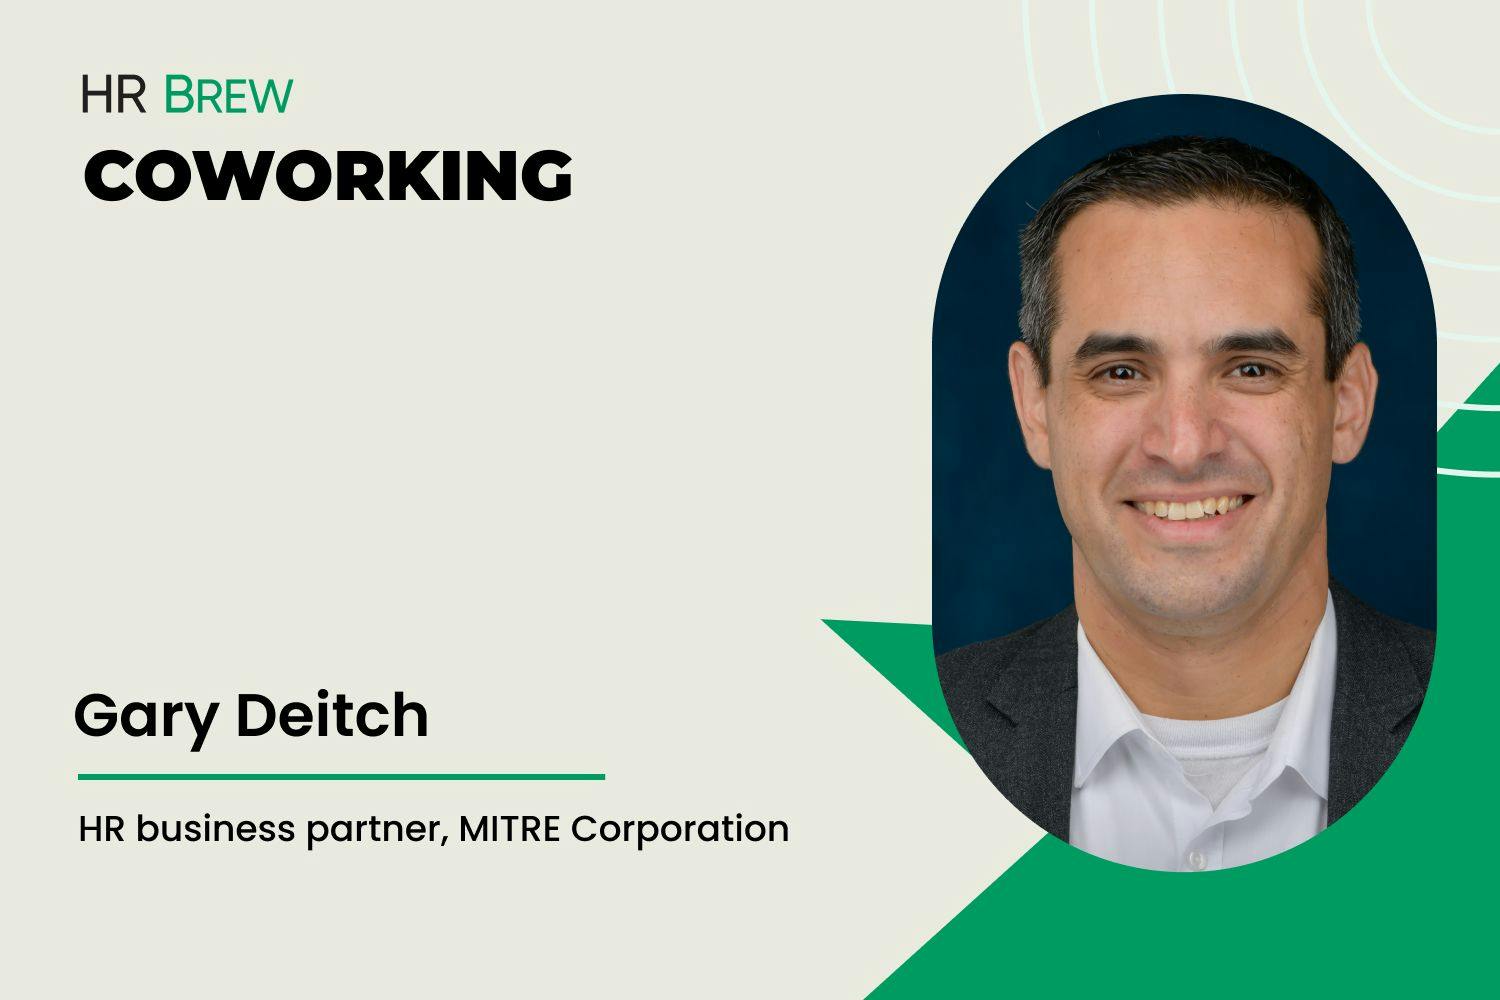 image of man smiling next to the text that says HR Brew Coworking Gary Deitch, HR business partner, MITRE Corporation